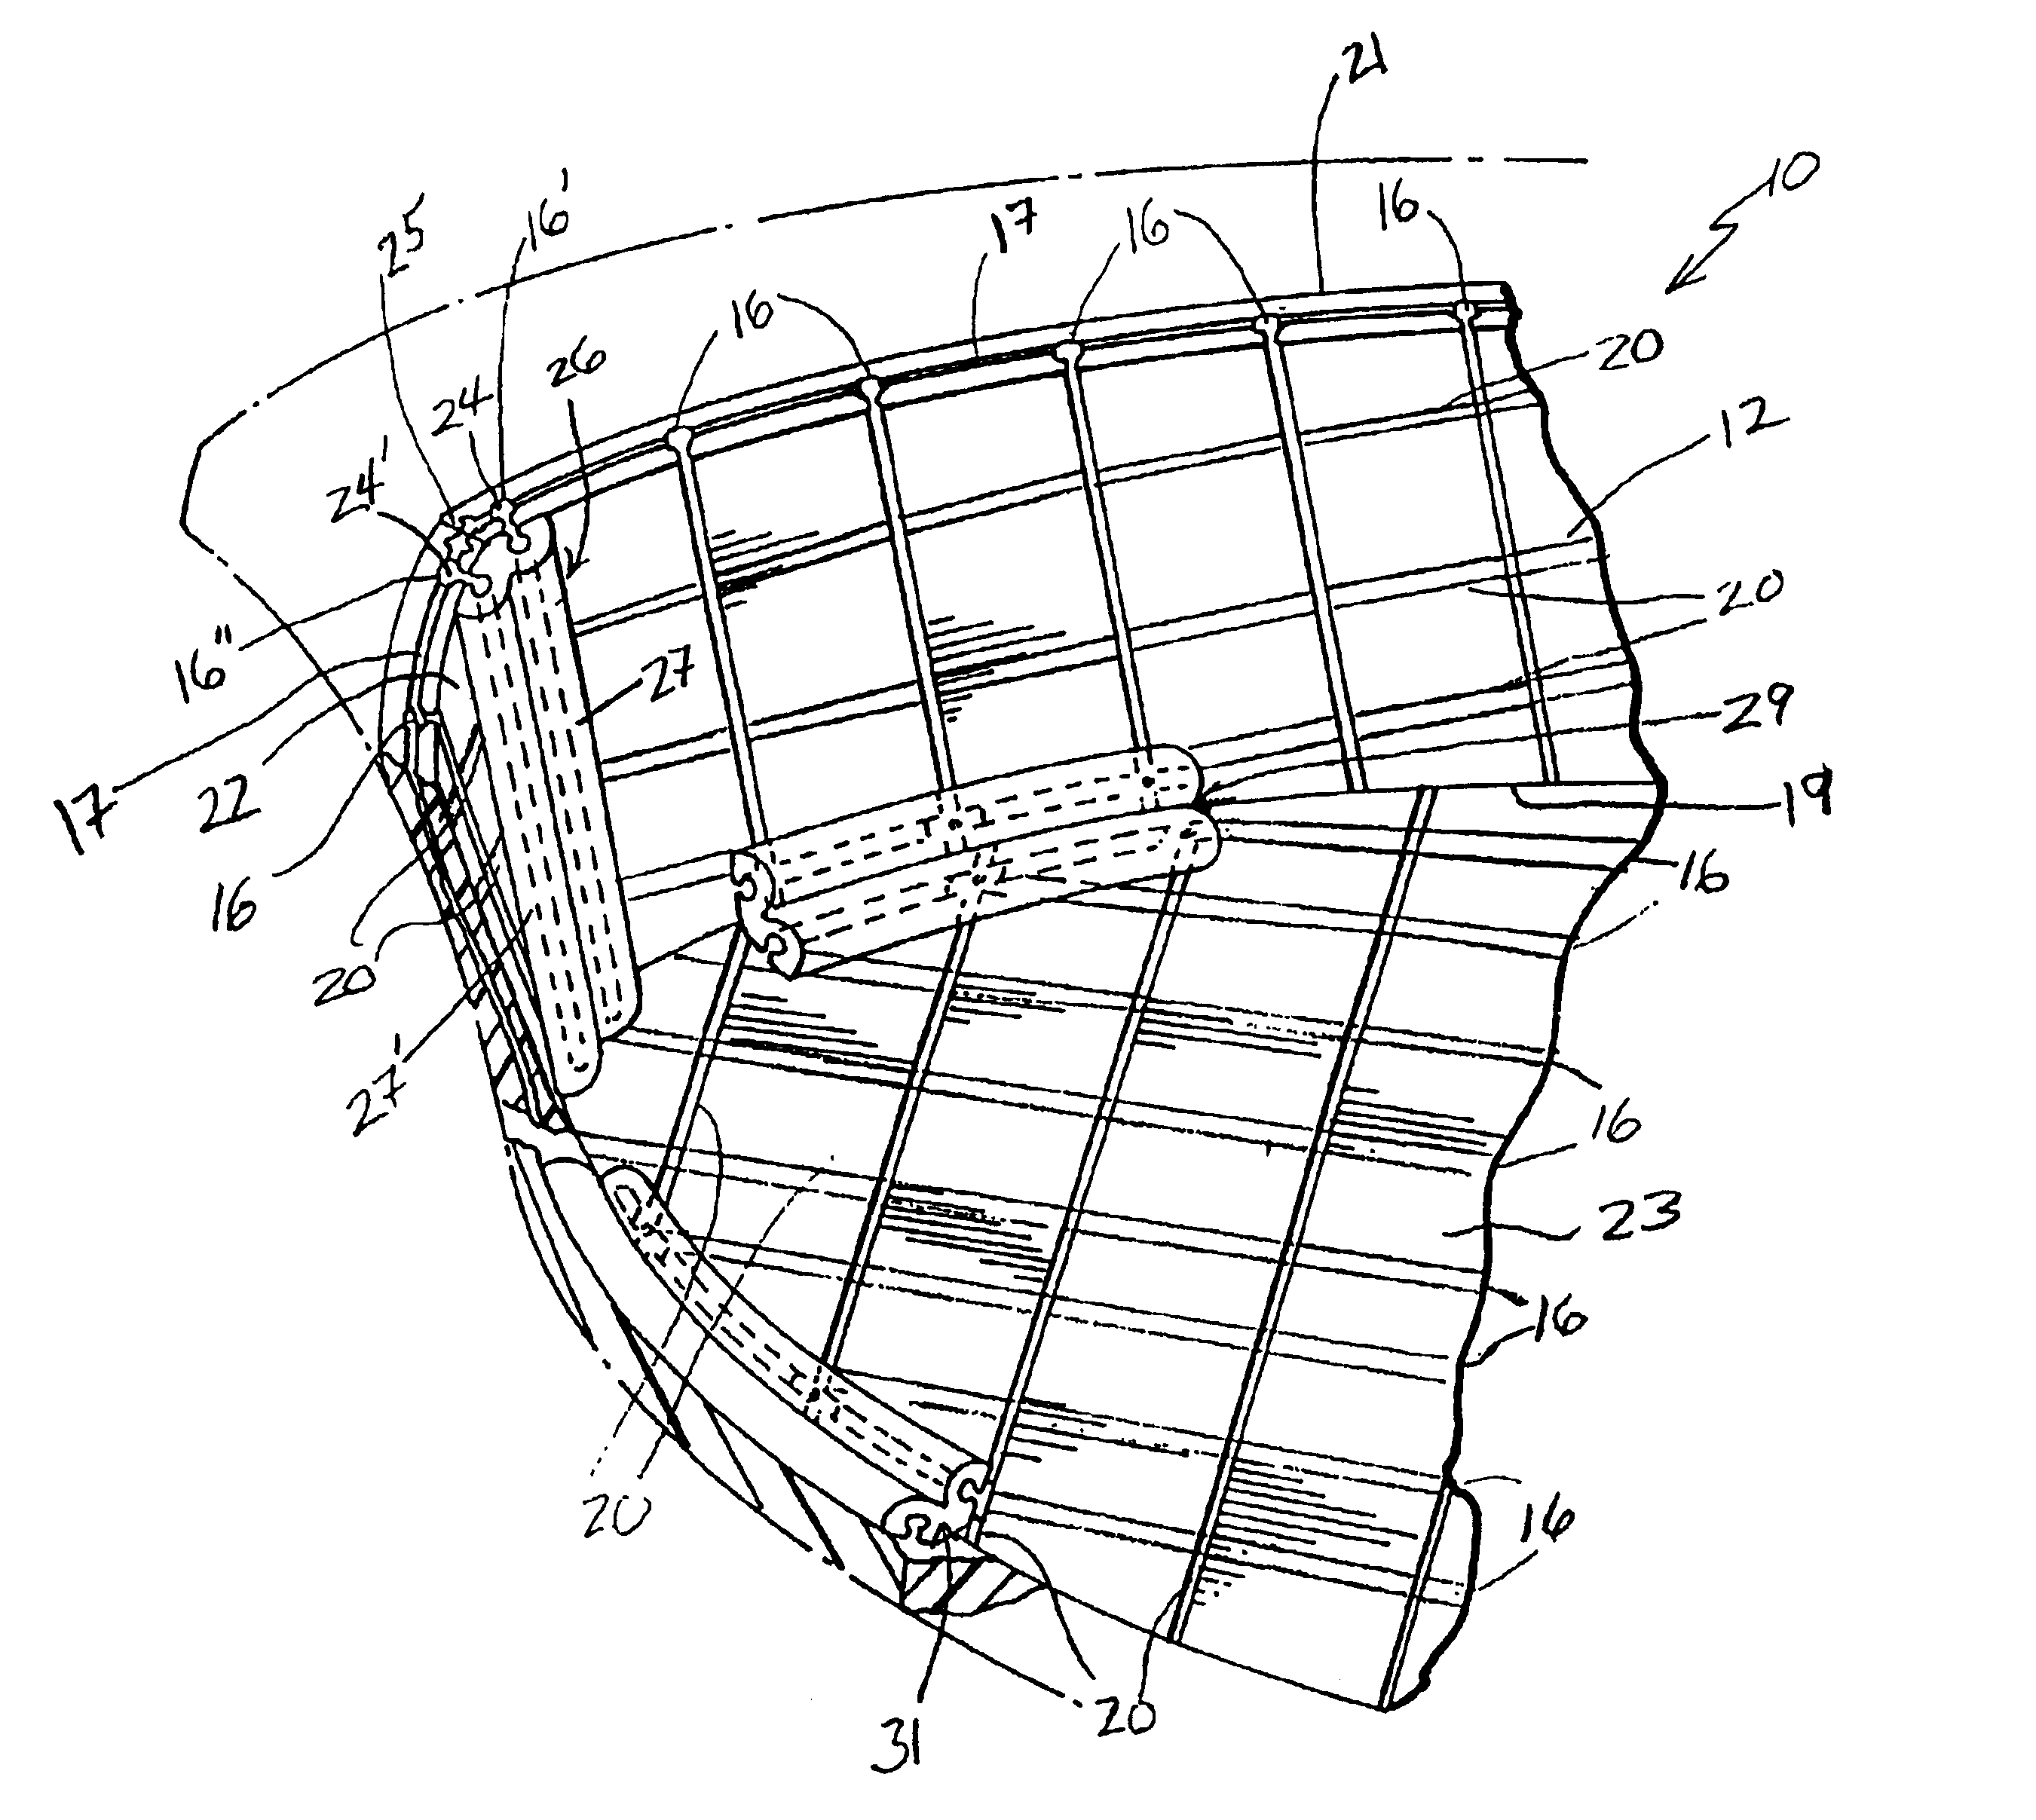 Method and apparatus for providing a modular storage system